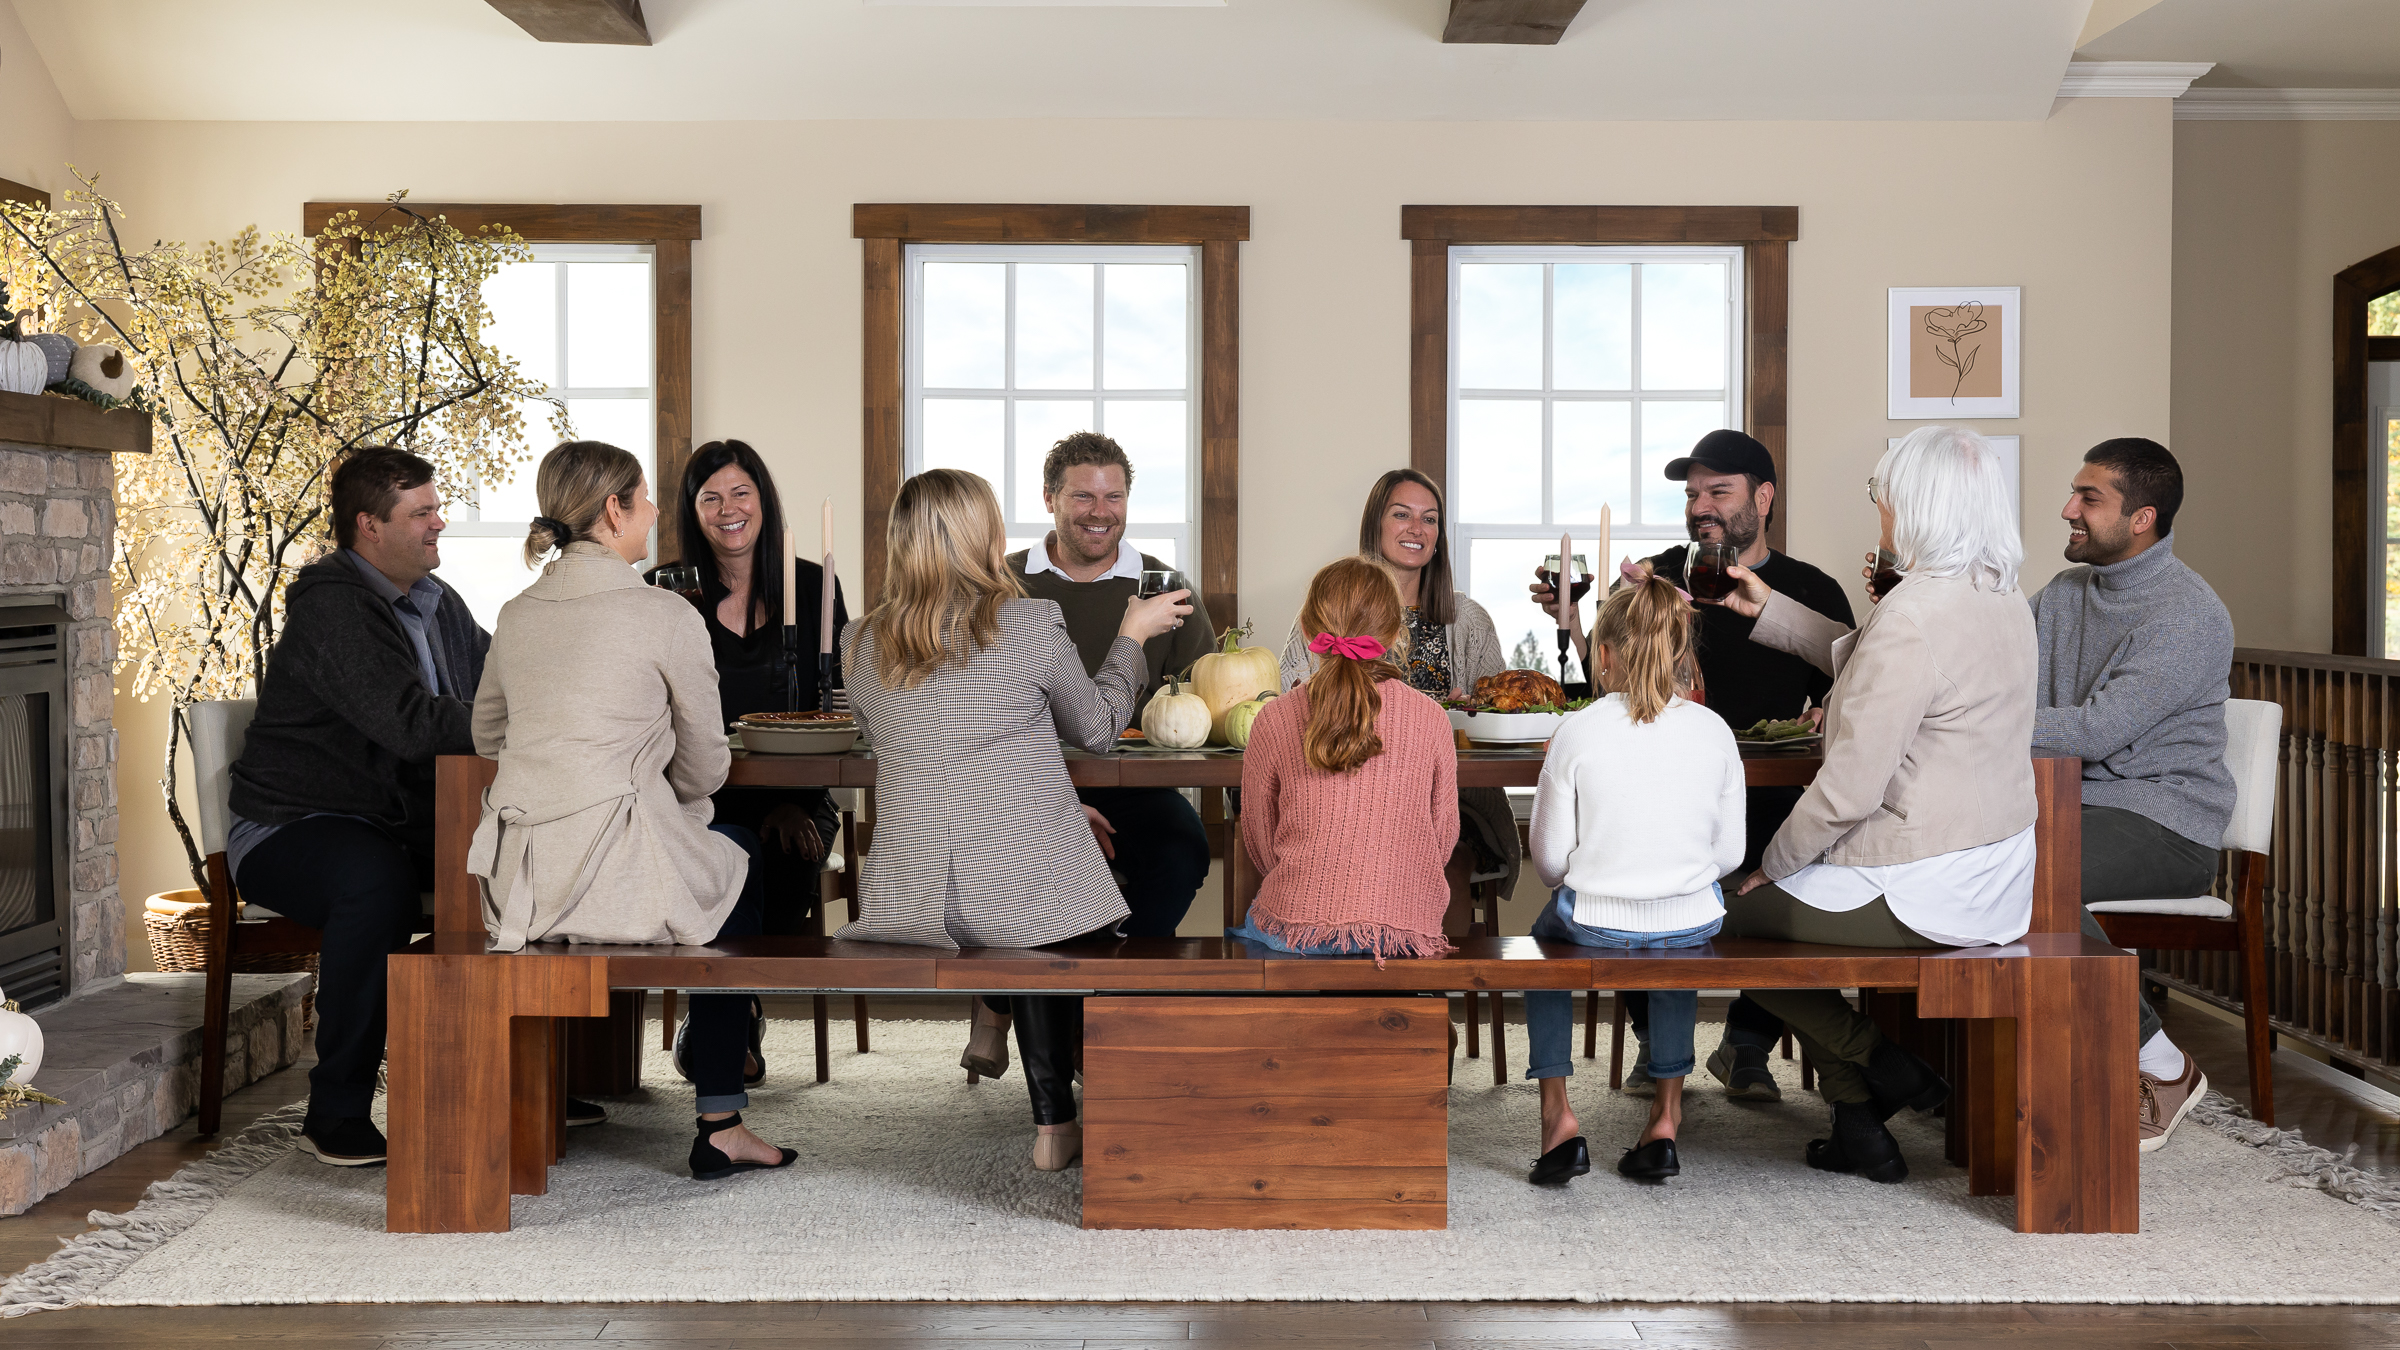 A family sitting at an extendable dining table celebrating Easter.